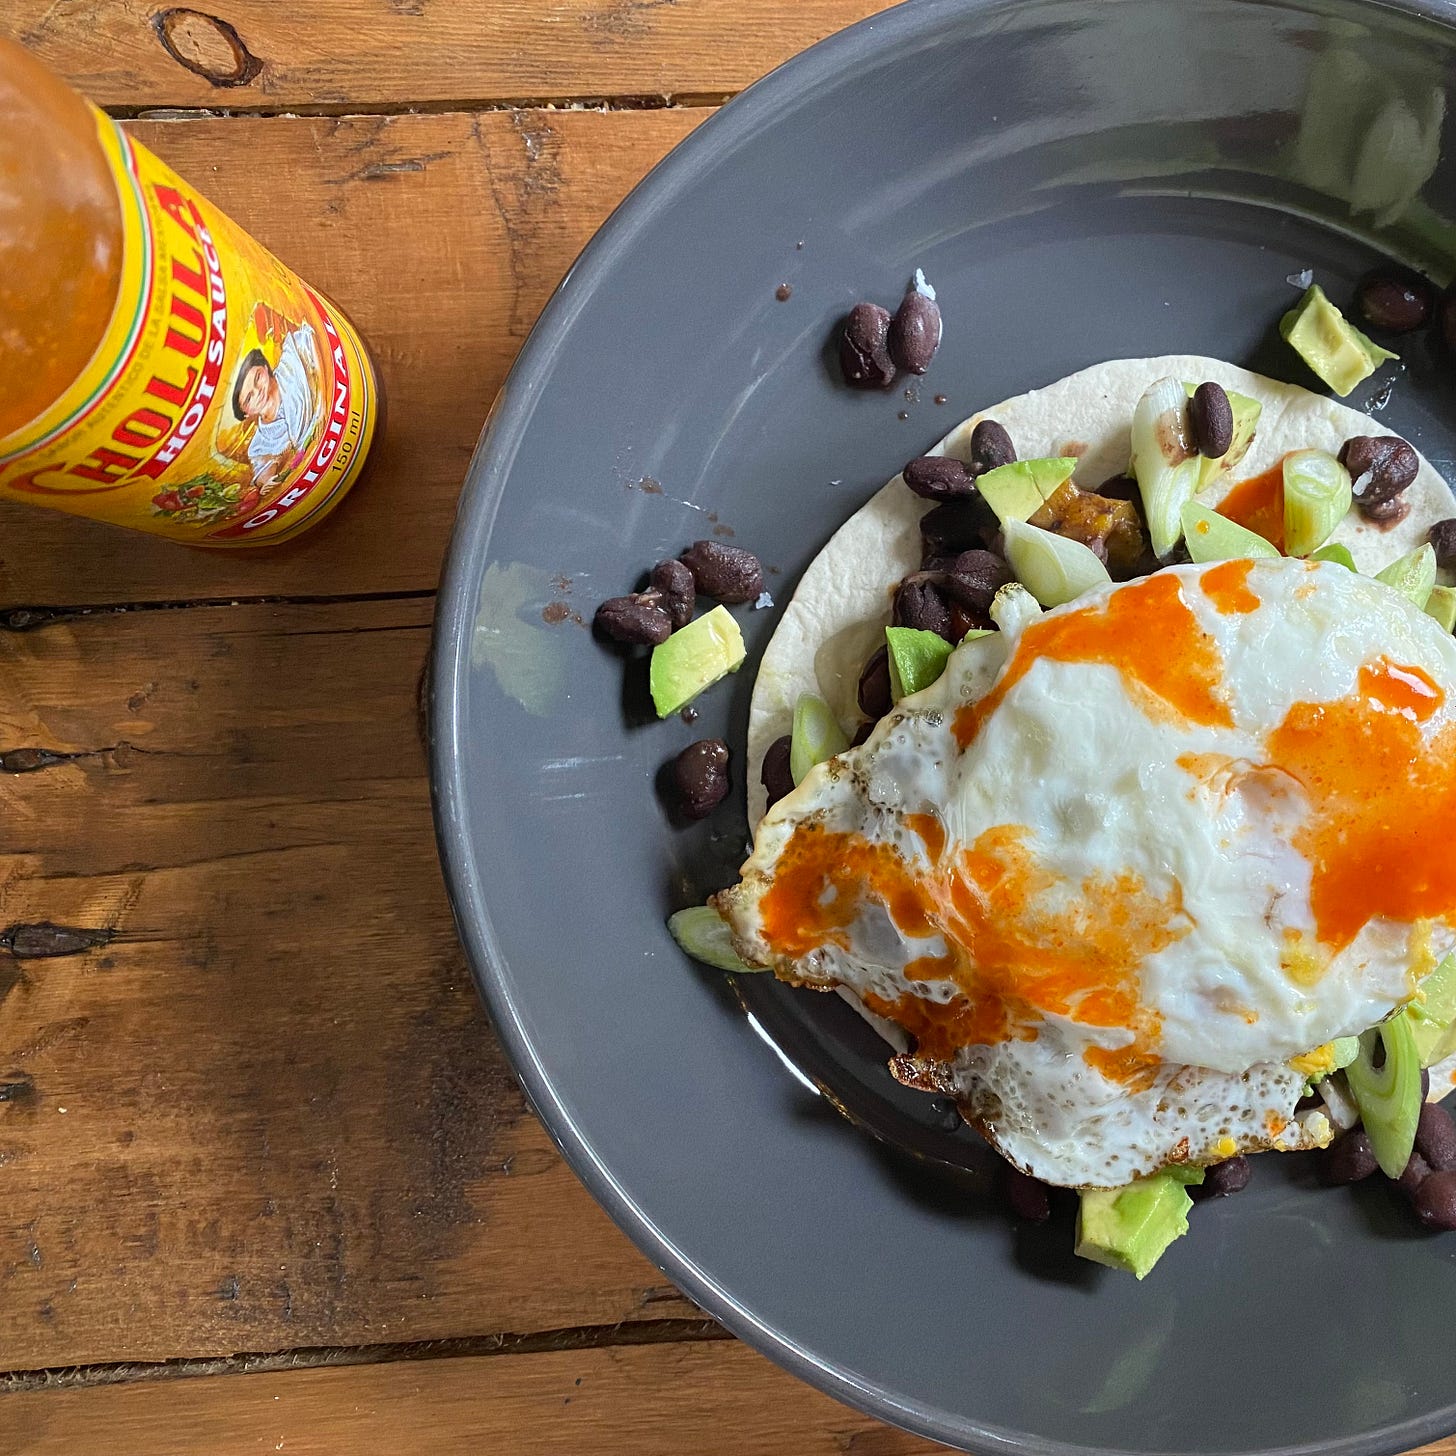 Grey bowl with toasted tortilla, black beans, avocado, eggs, a bottle of cholula hot sauce to the side